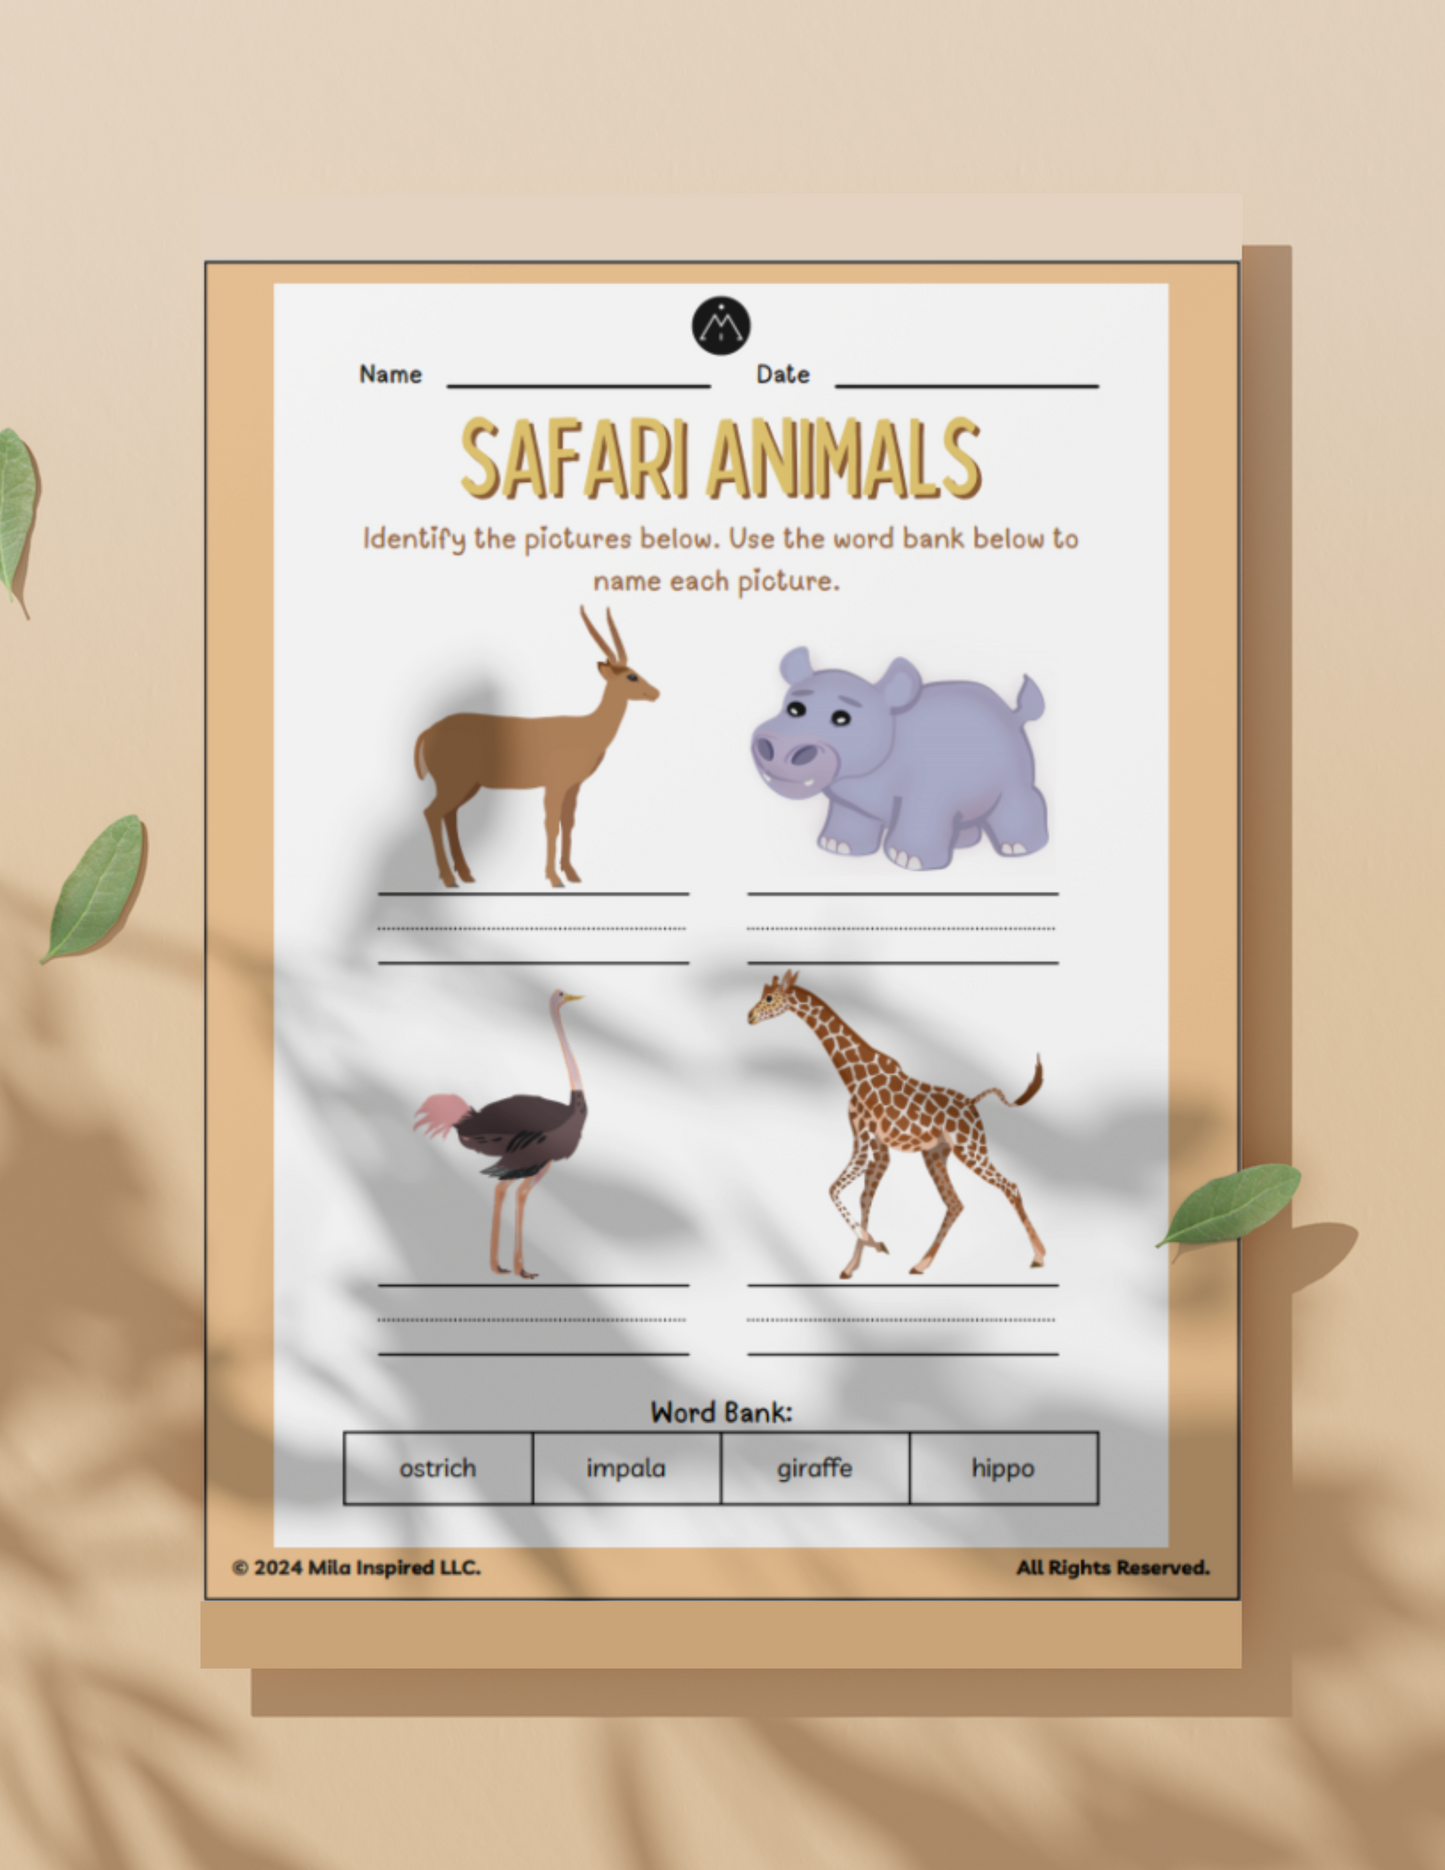 Safari Animals Activity Worksheet (INSTANT DOWNLOAD): Activity Worksheet for Young Children | 3 Pages with Fun Activities and Images from 'The Little Elephant's Big Adventure'